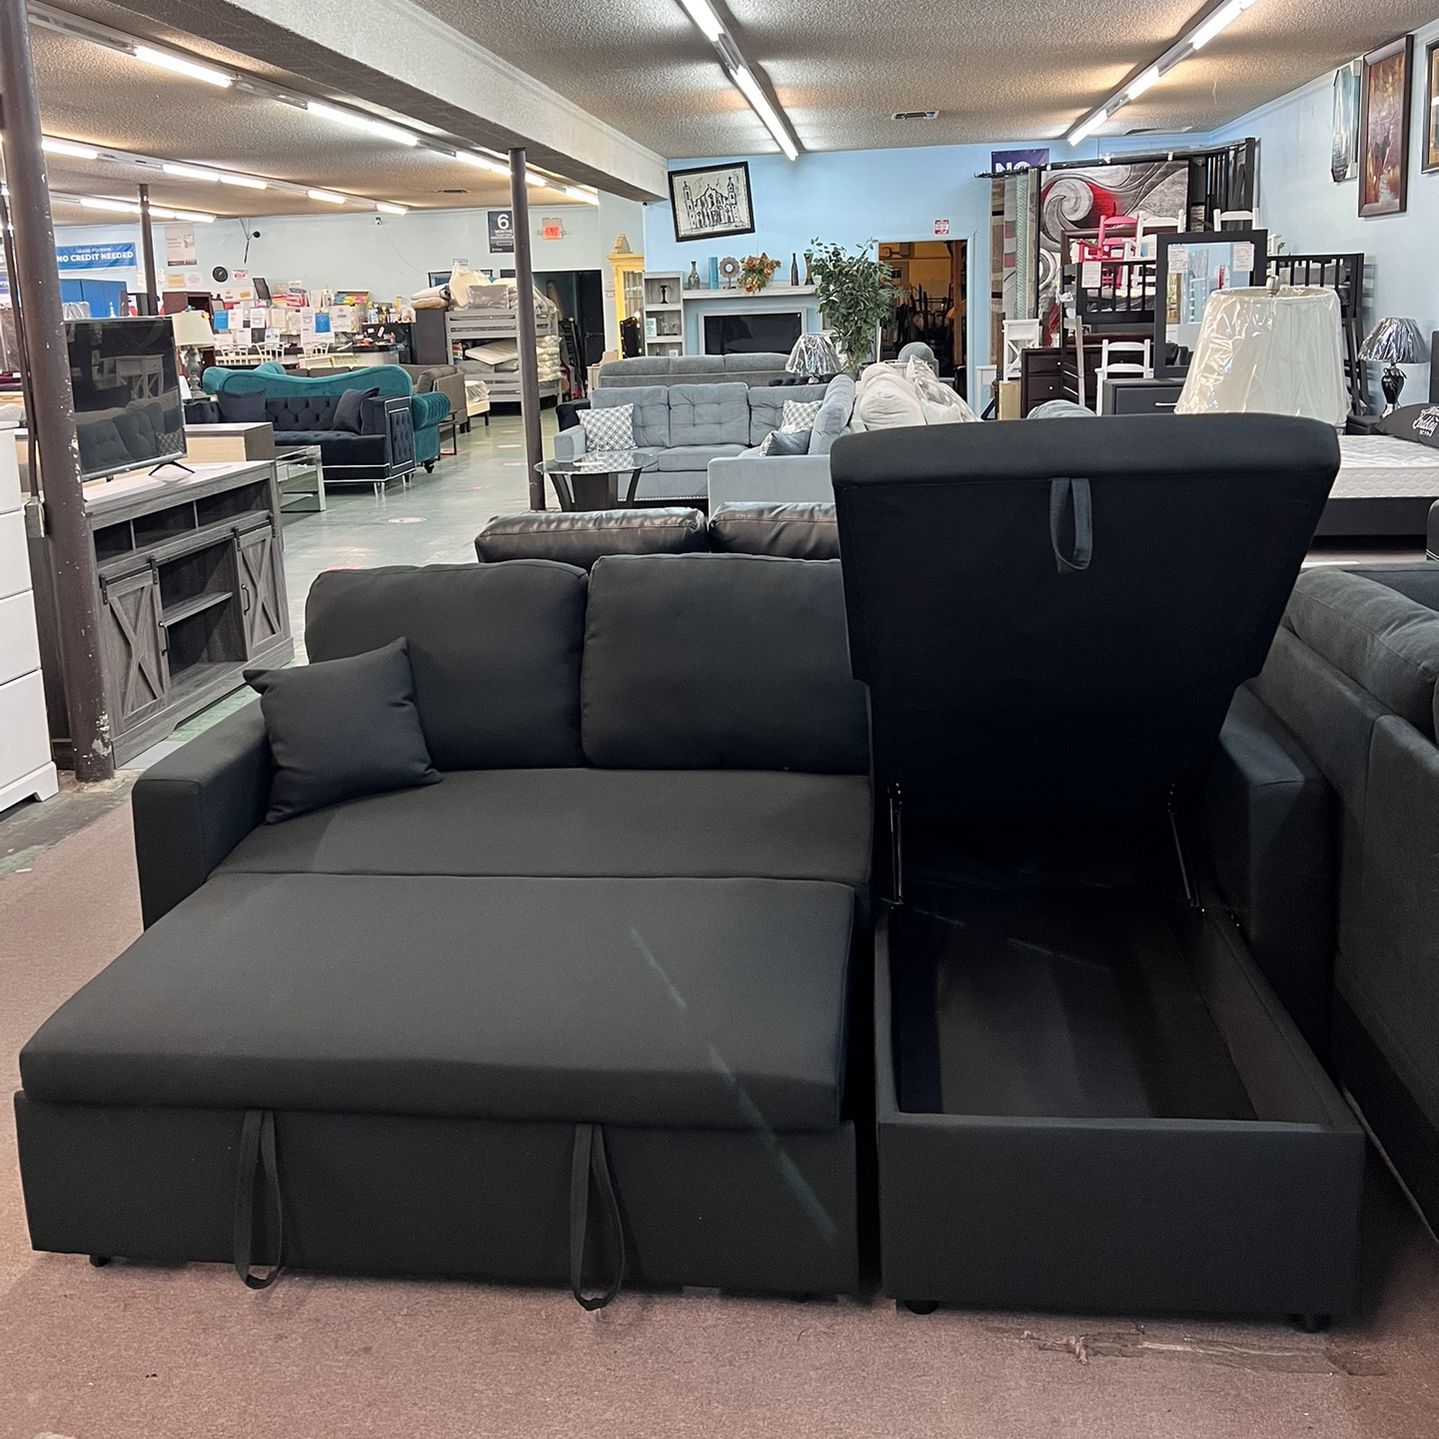 🚚Hot Deal🚚Brand New Reversible Pull Up Sectional With Storage Chaise $599, Black Or Gray Color, In Stock